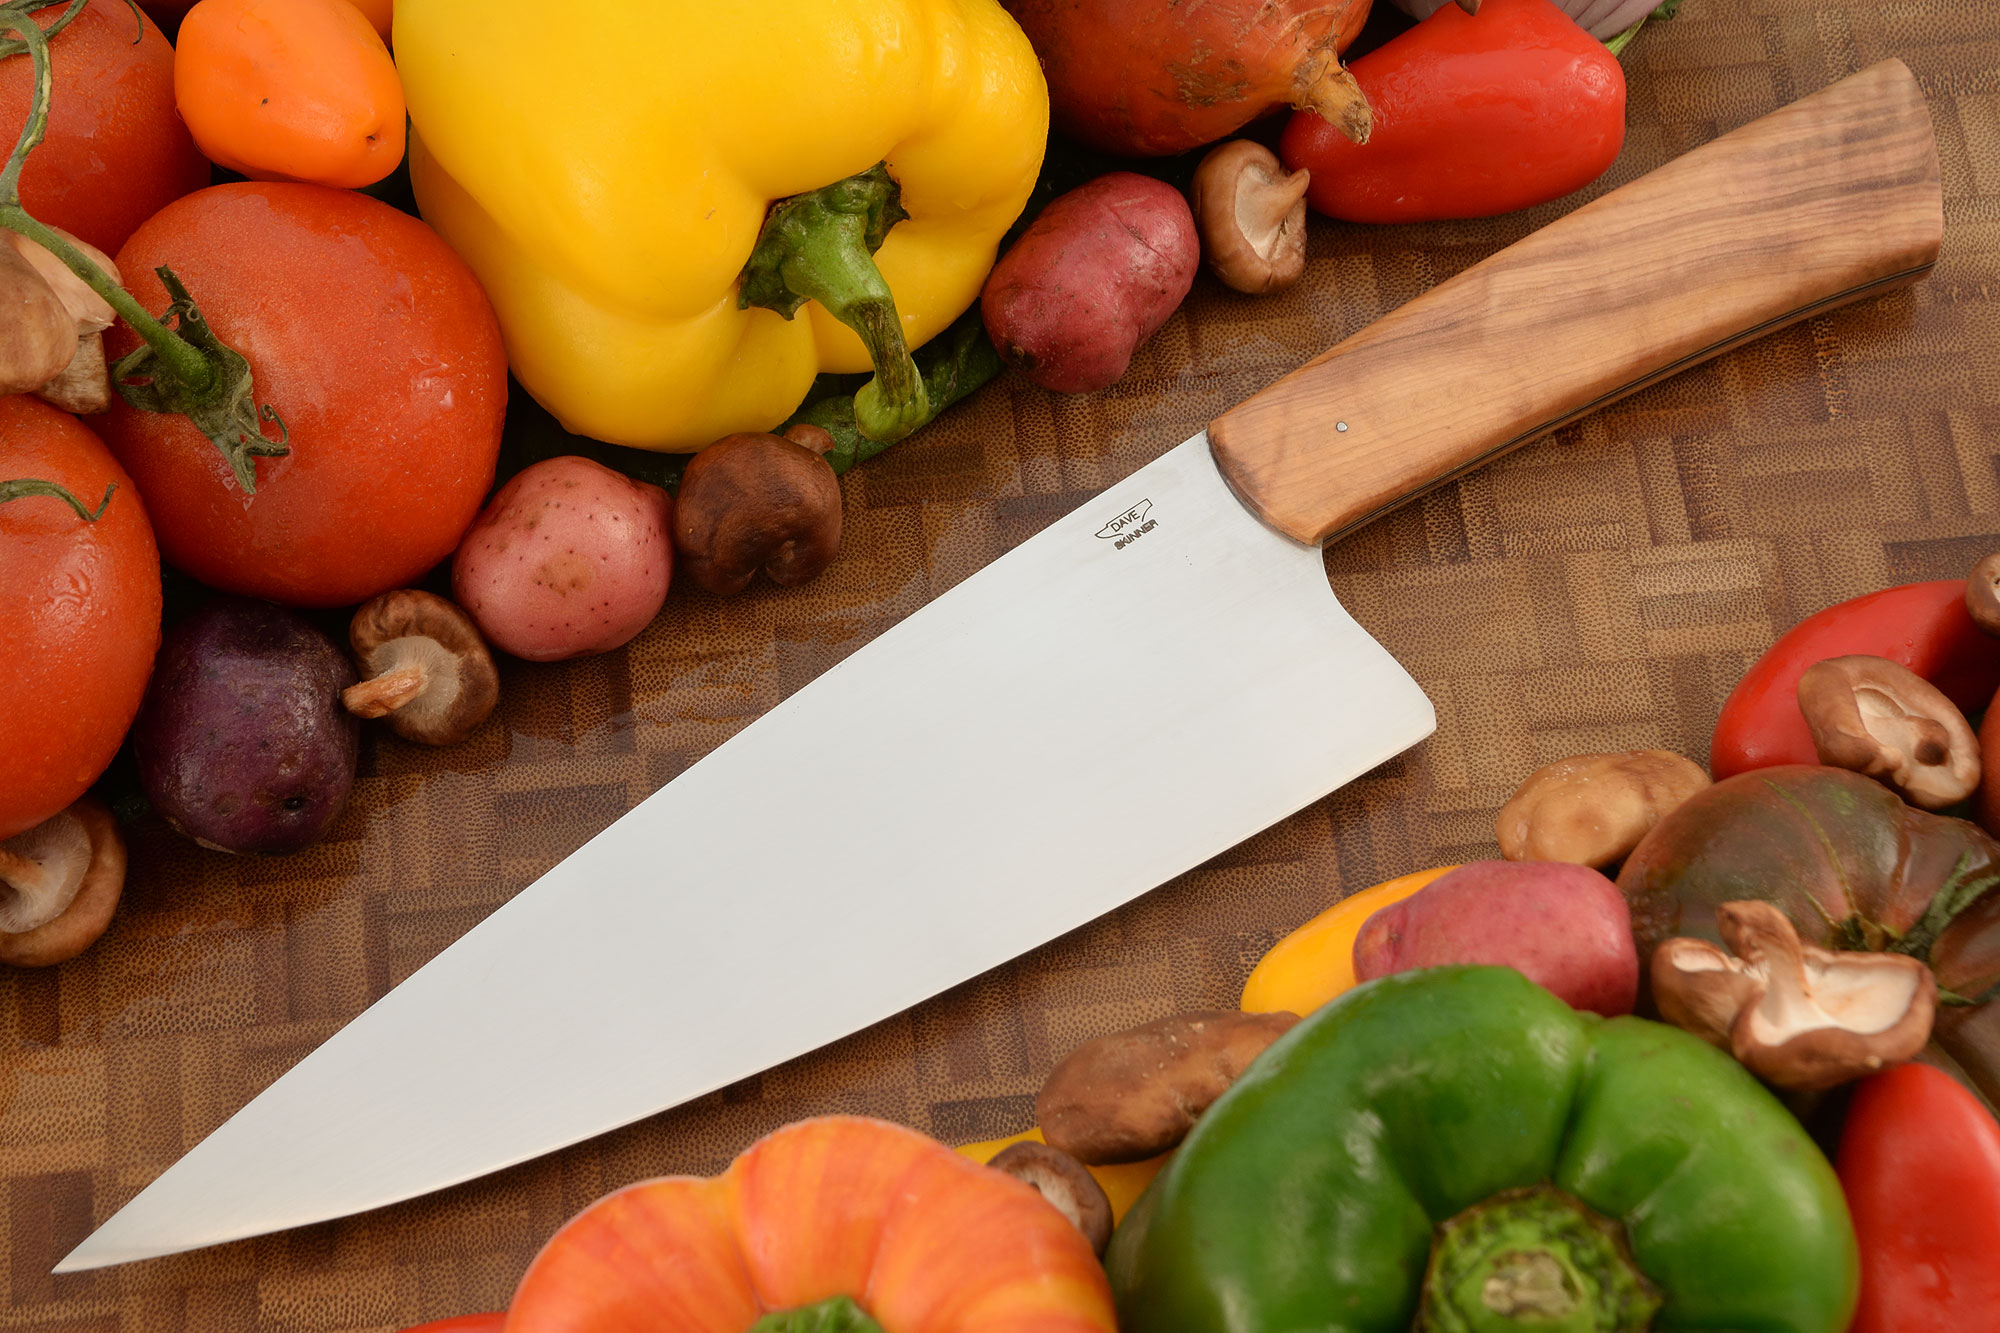 Commercial Chef Pro Chef Knife 8 inch Blade with Triple Rivet